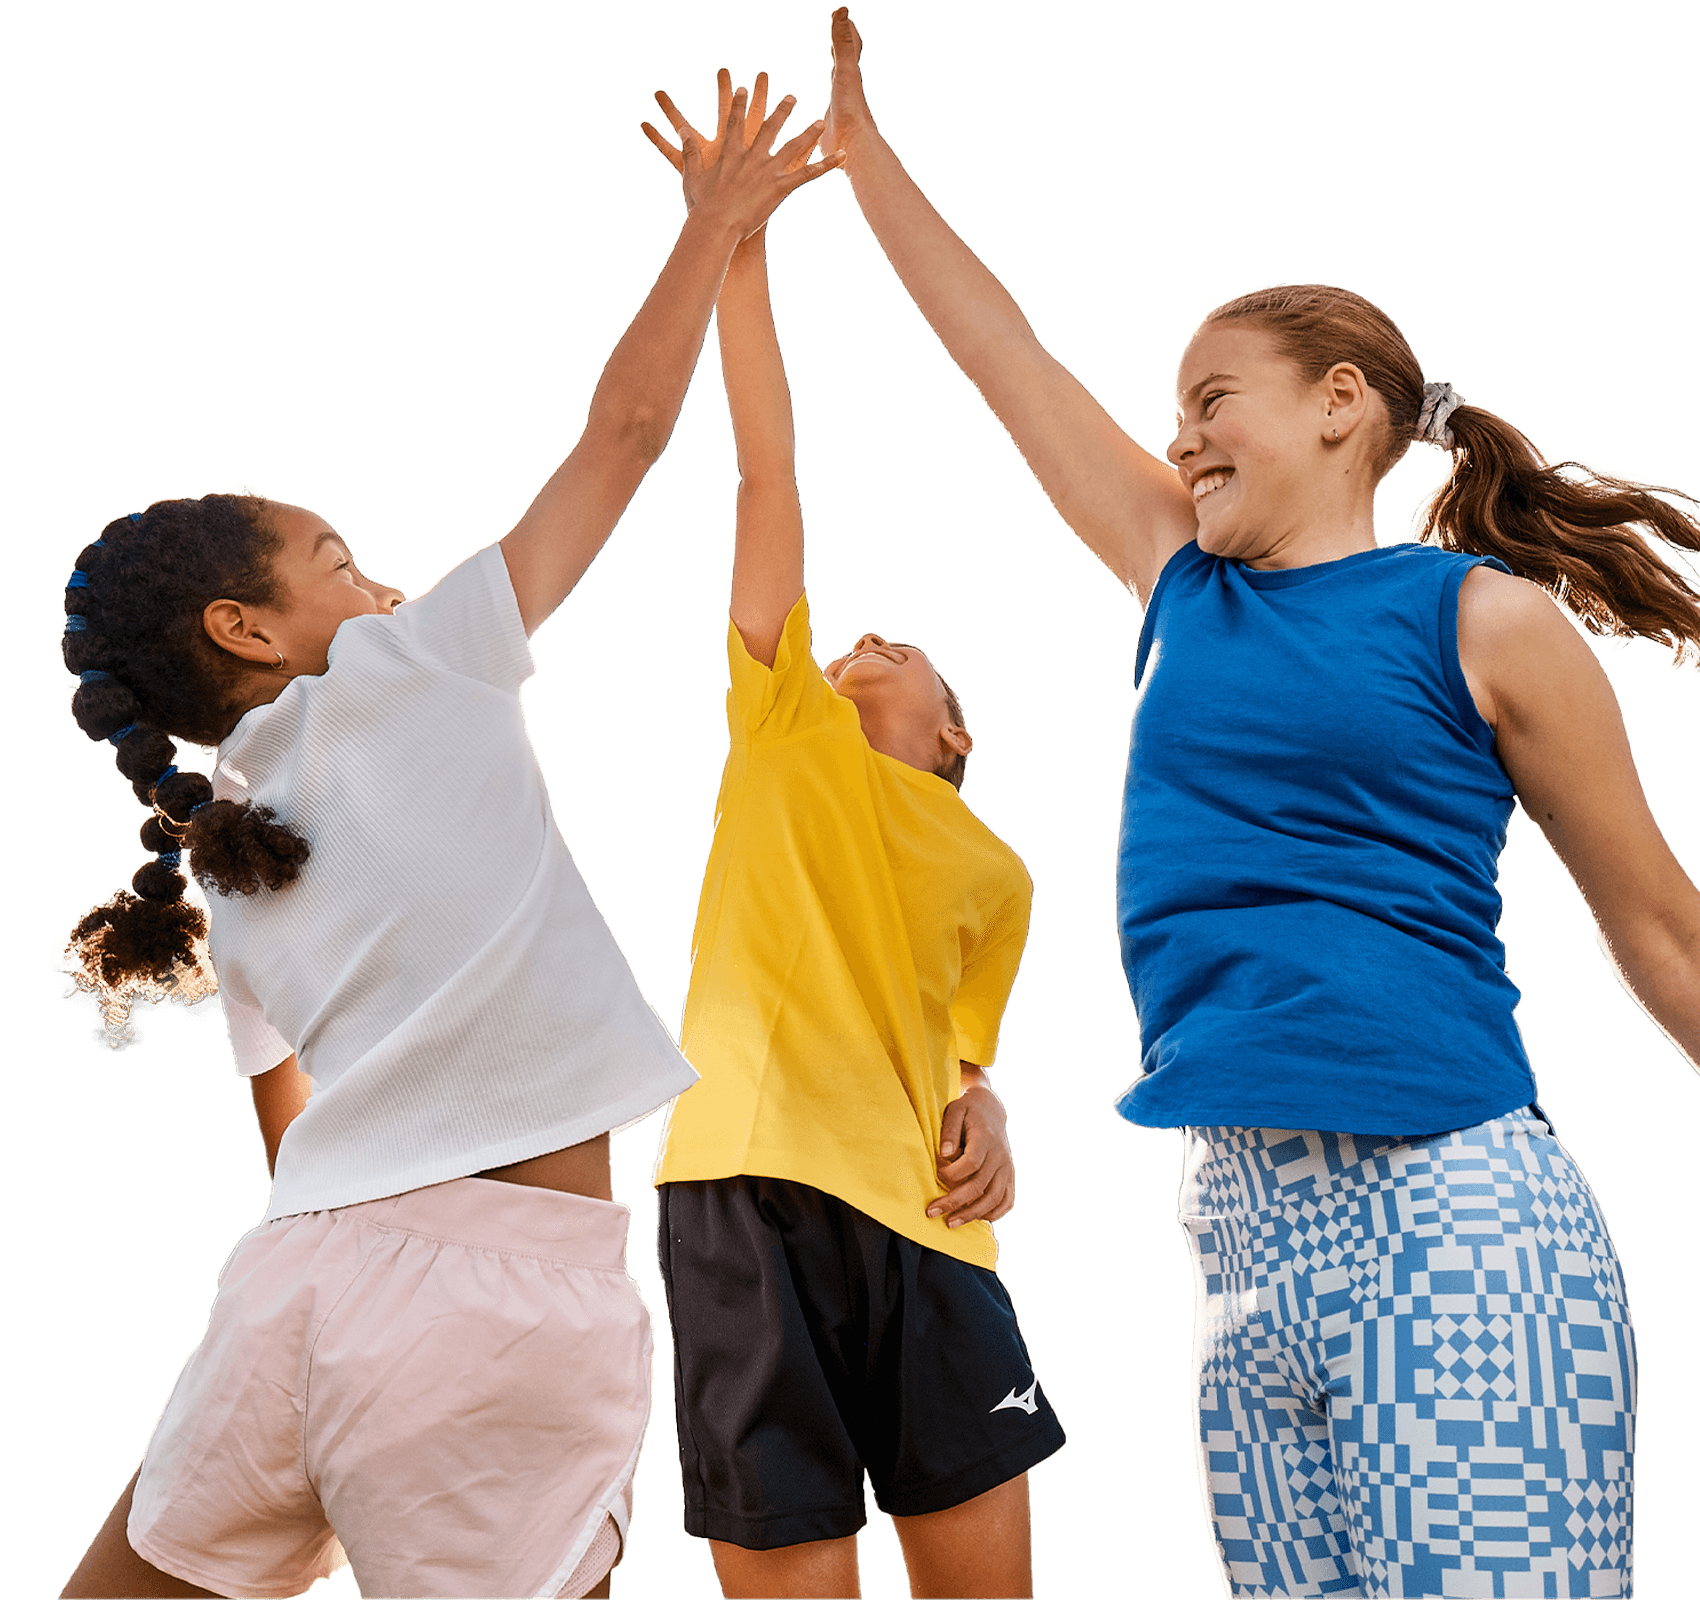 Enthusiastic group of children jump with their hands together